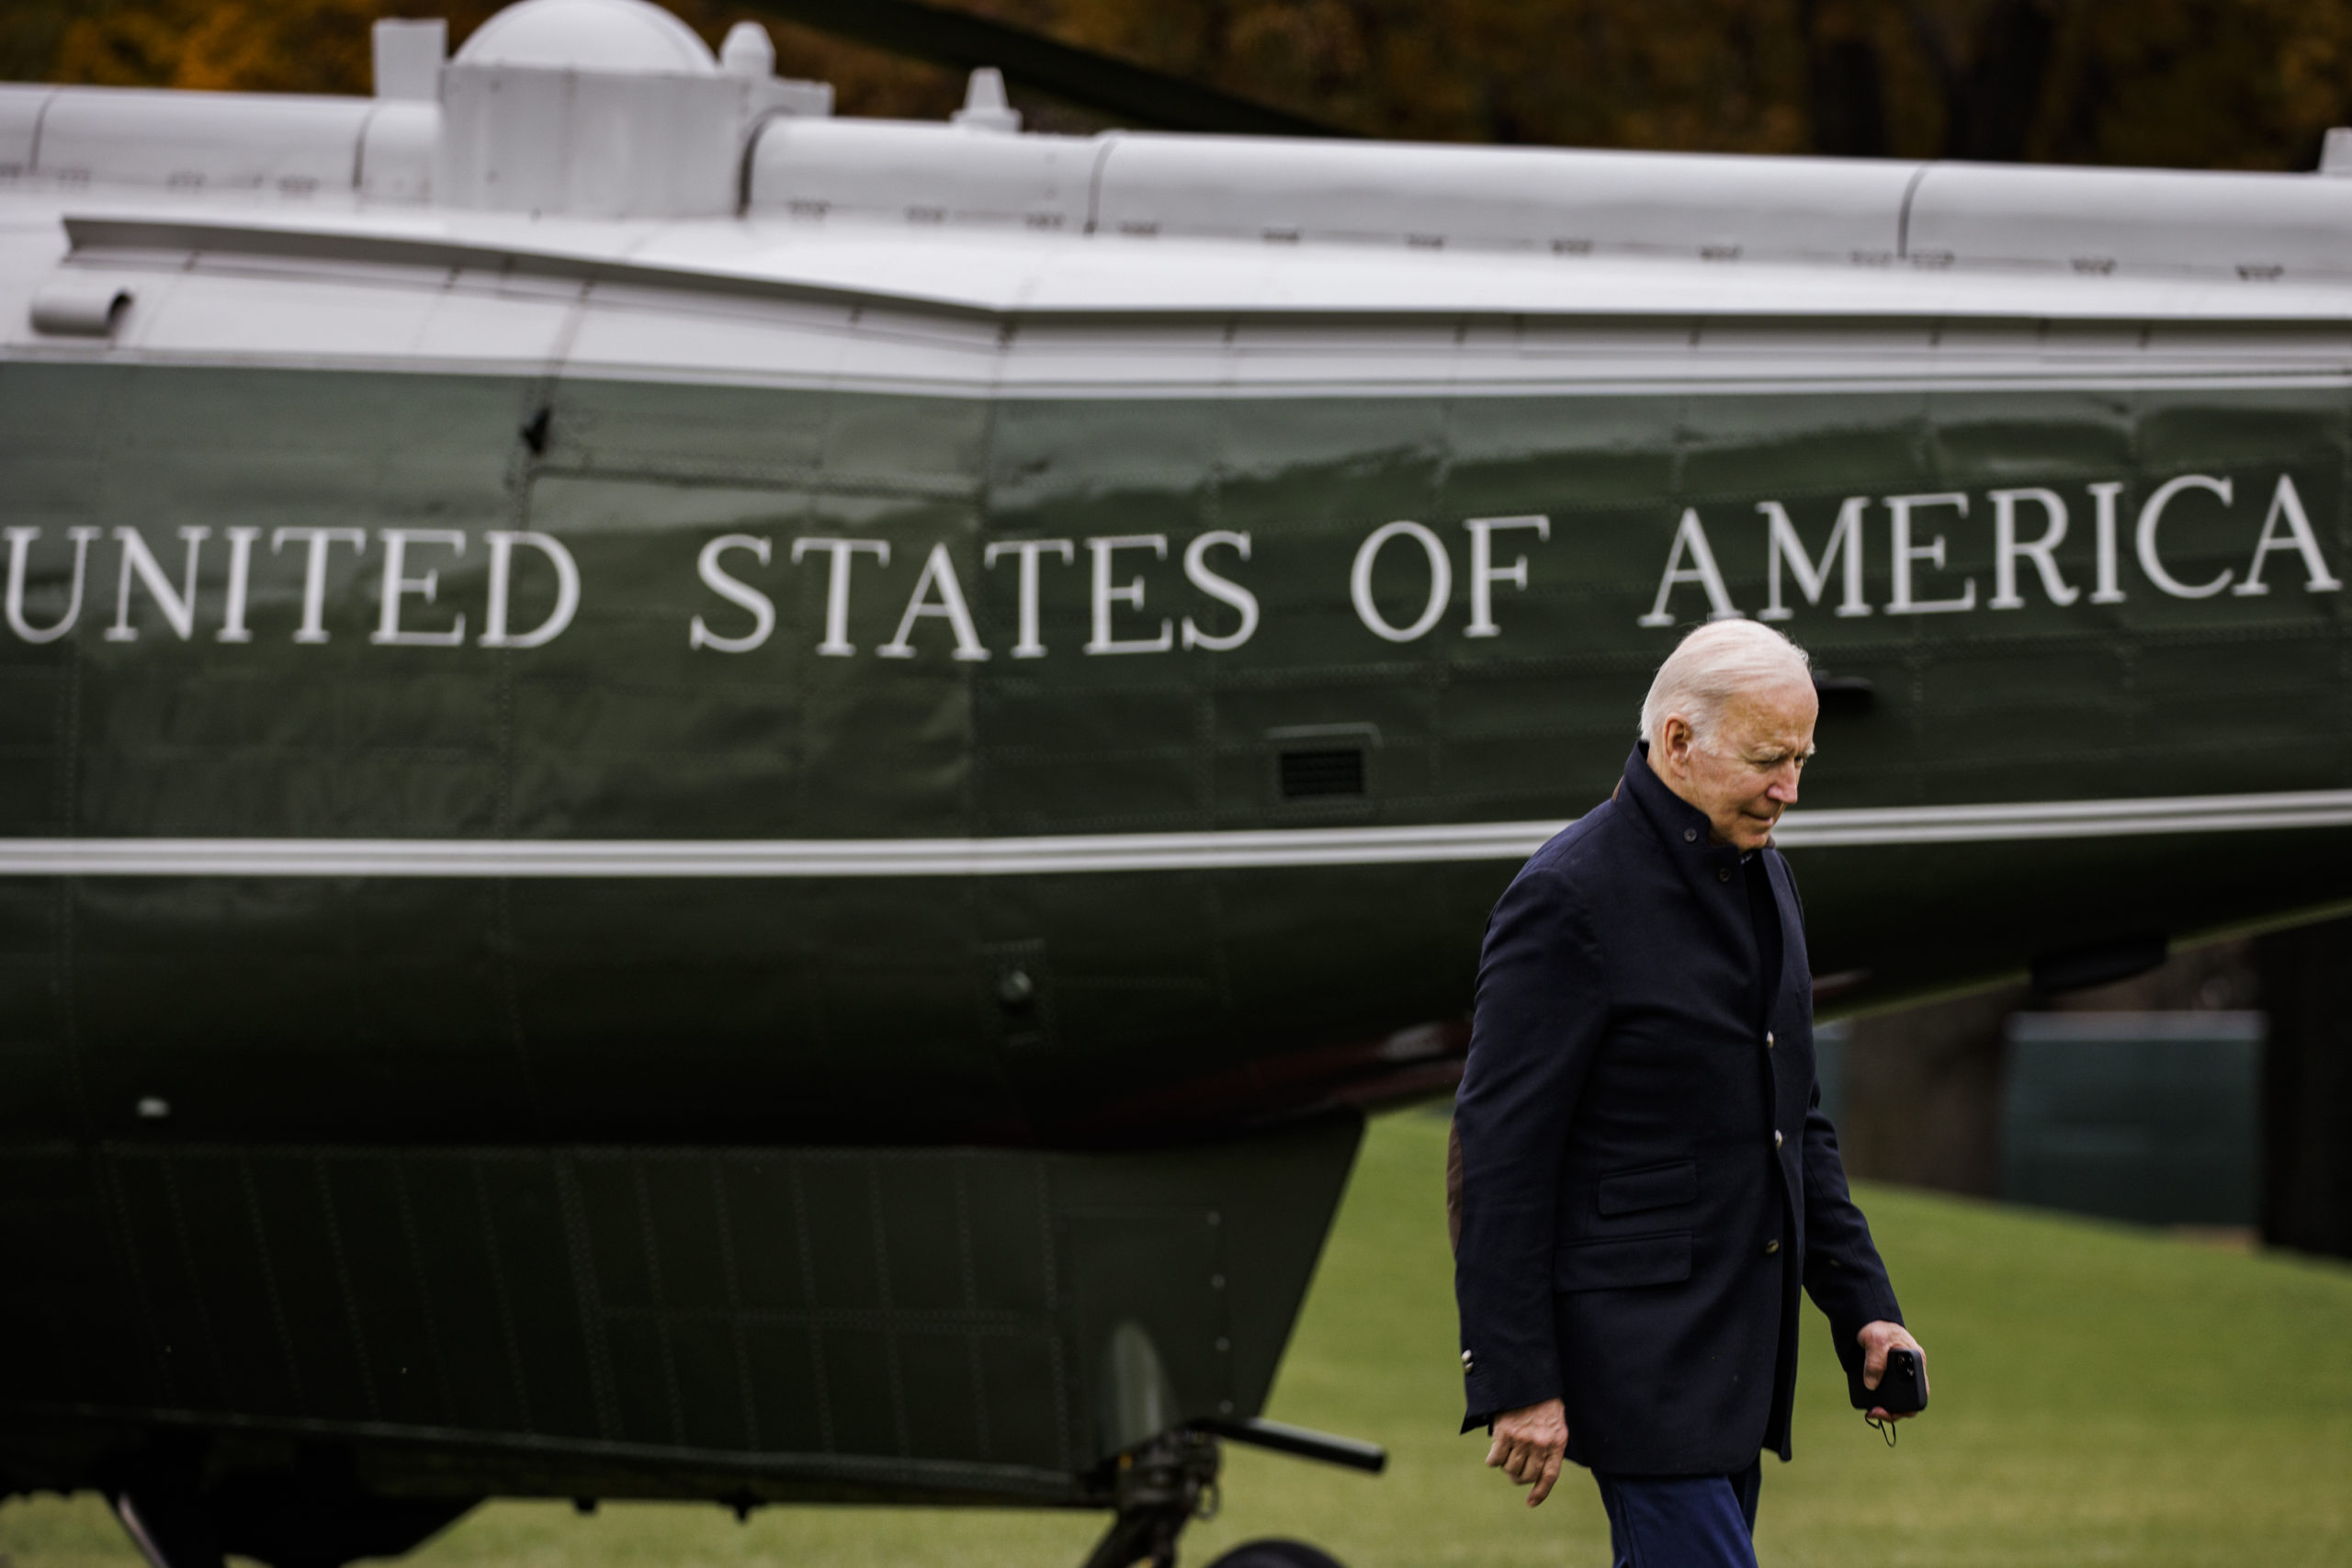 WASHINGTON, DC - NOVEMBER 21: U.S. President Joe Biden walks to the West Wing from Marine One on the South Lawn off the White House on November 21, 2021 in Washington, DC. The President spent the weekend at his home in Wilmington, DE. (Photo by Samuel Corum/Getty Images)